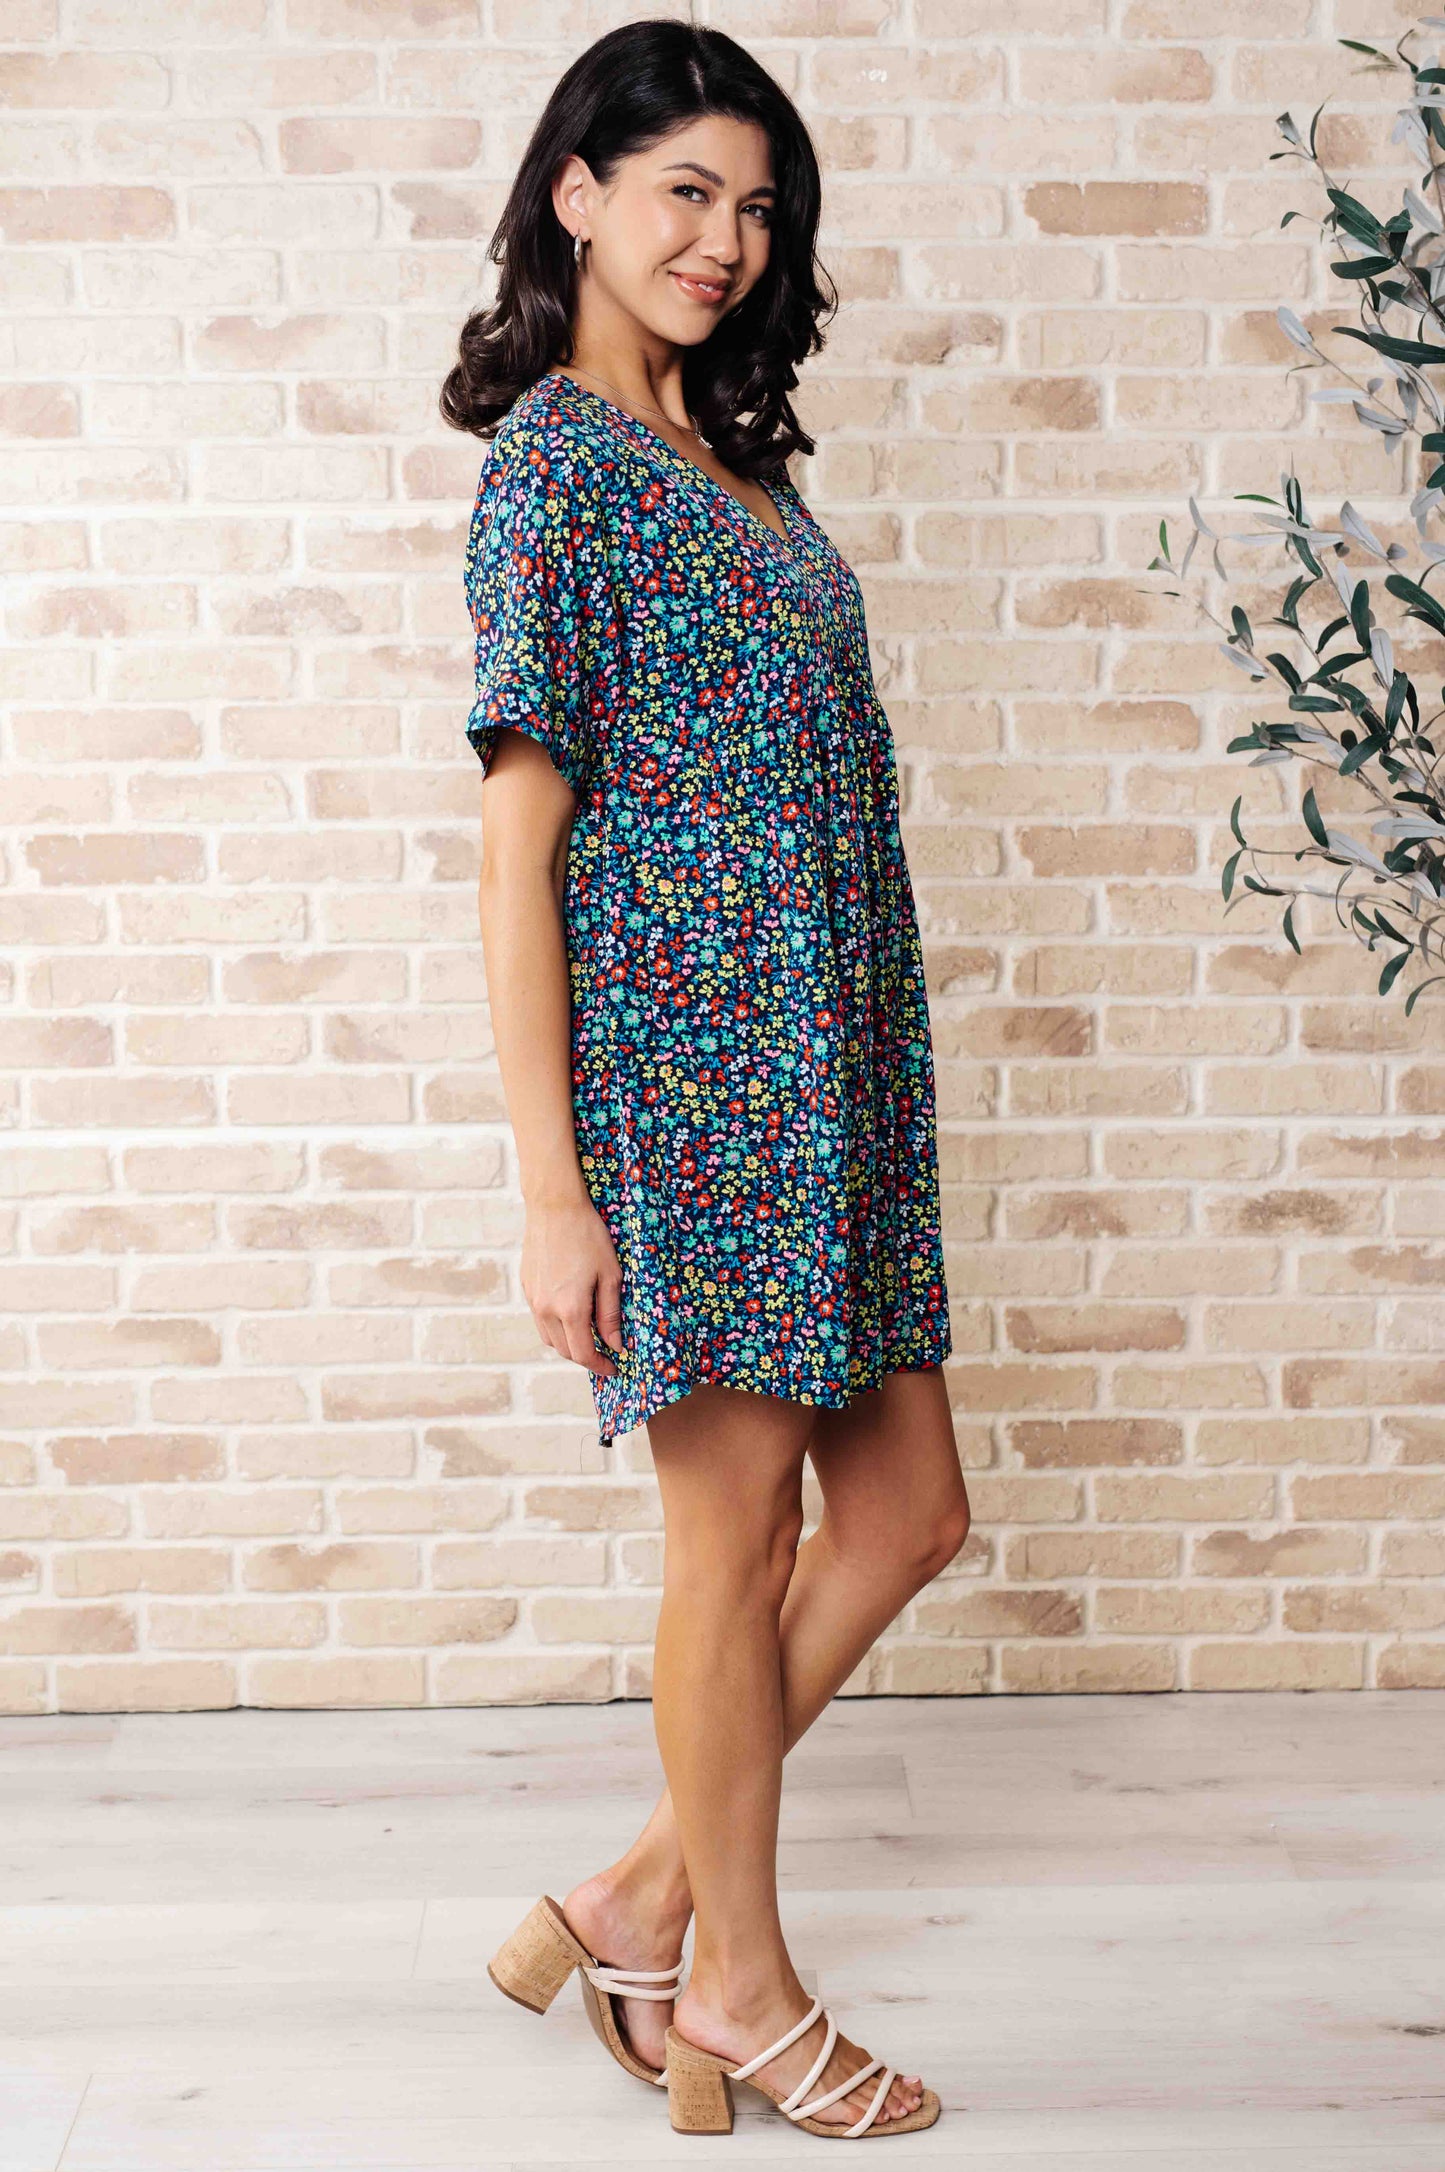 What's the Hurry About? Floral Dress